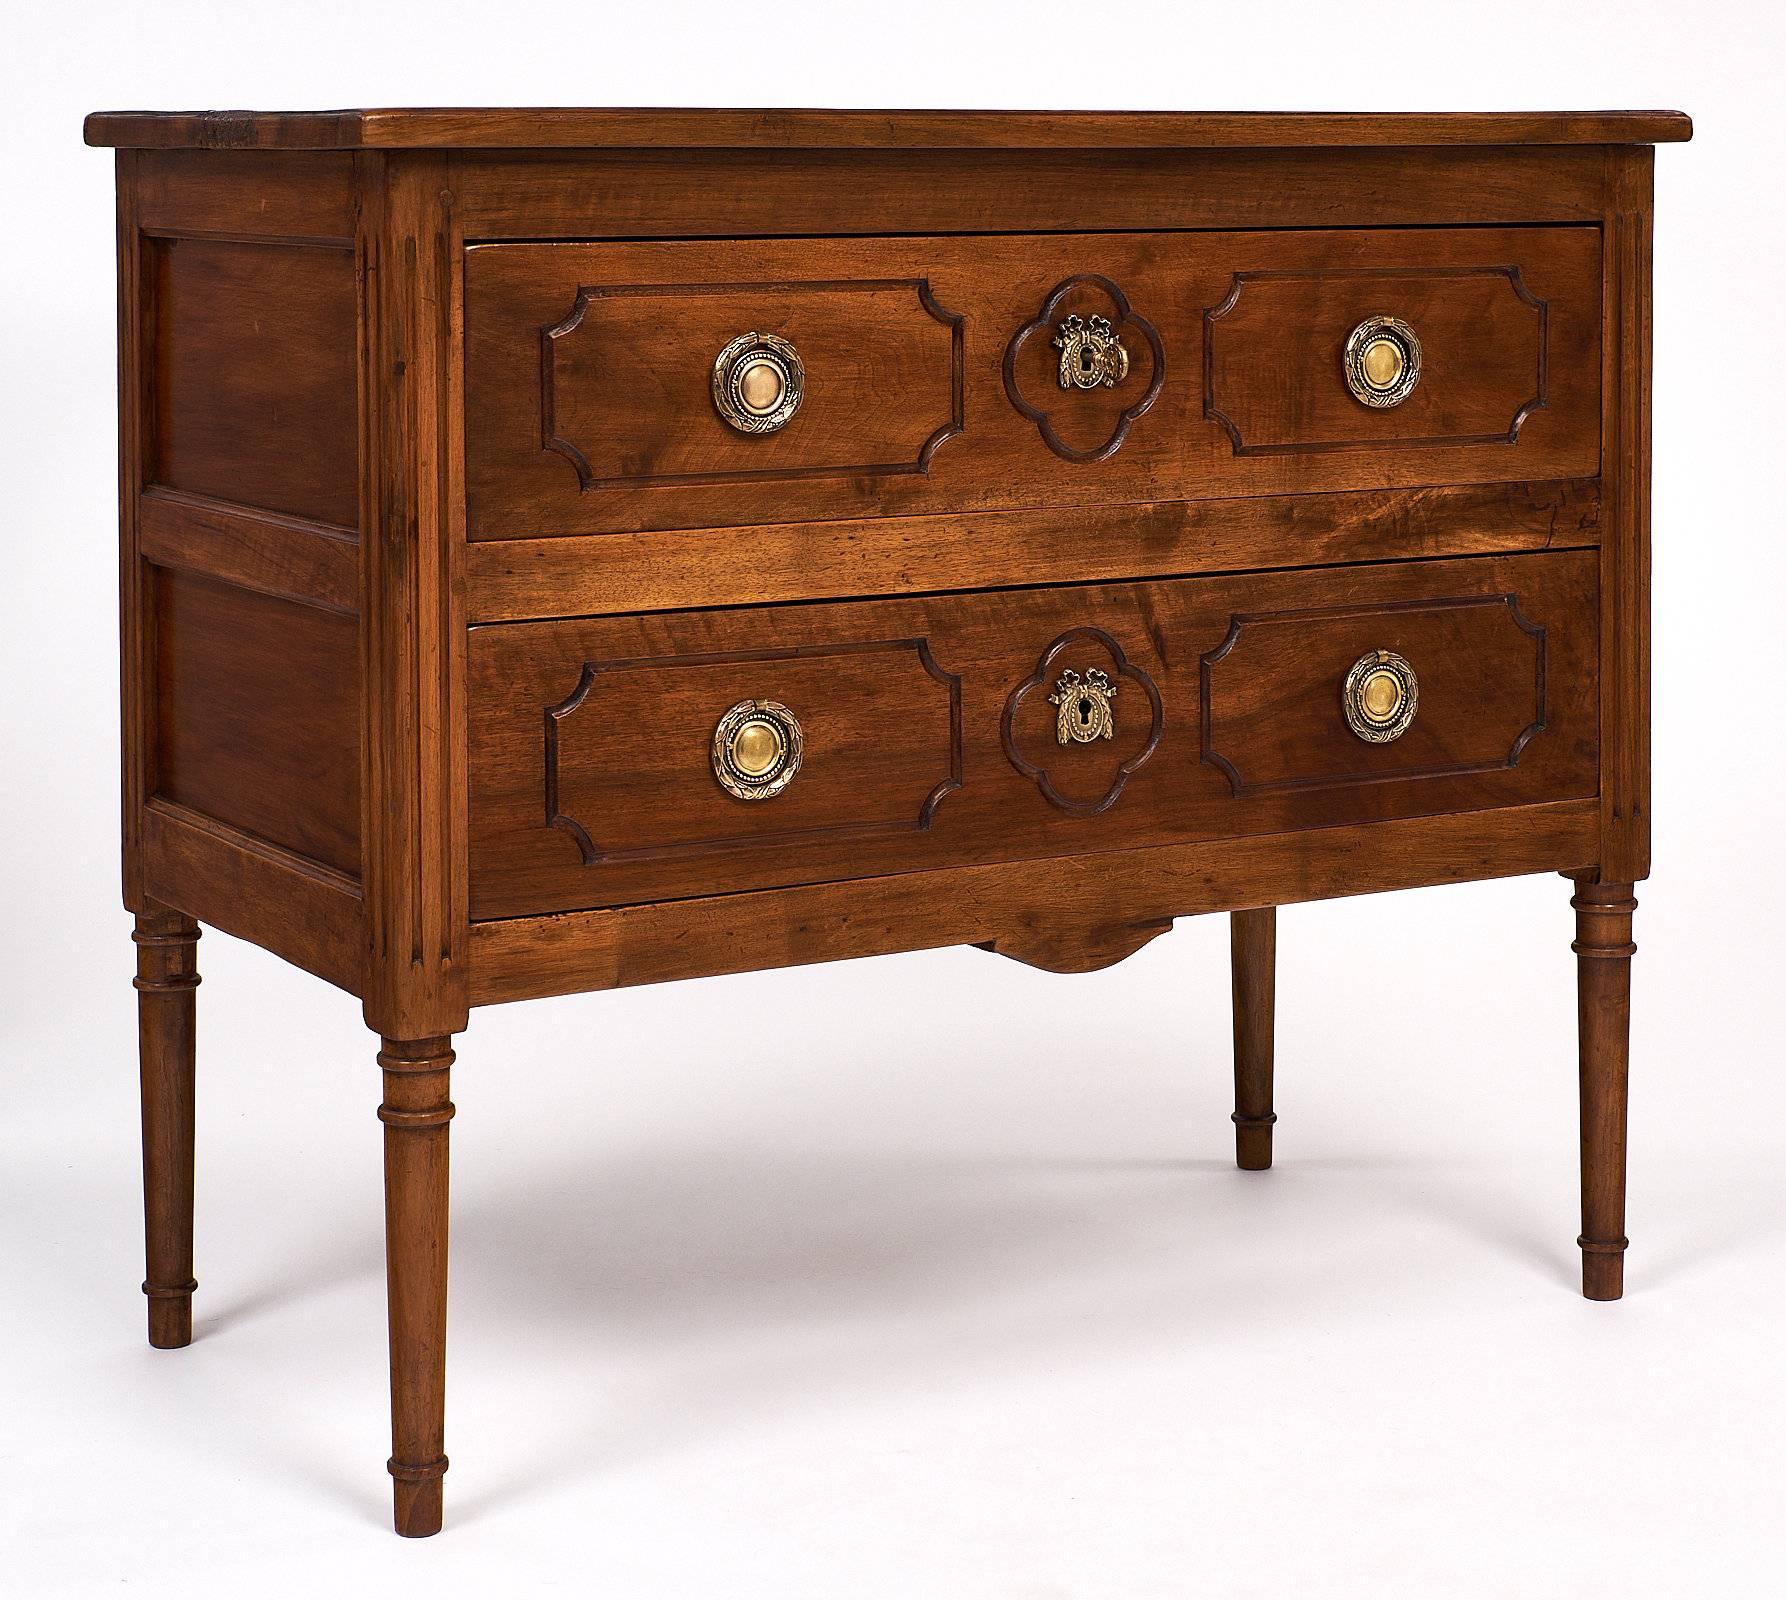 Beautiful chest in the Louis XVI style. The walnut has a warm honey tone and is in excellent condition. The fluting on the sides is hand carved, as well as the classic and elegant carving that surrounds the brass hardware pulls and locks. Both